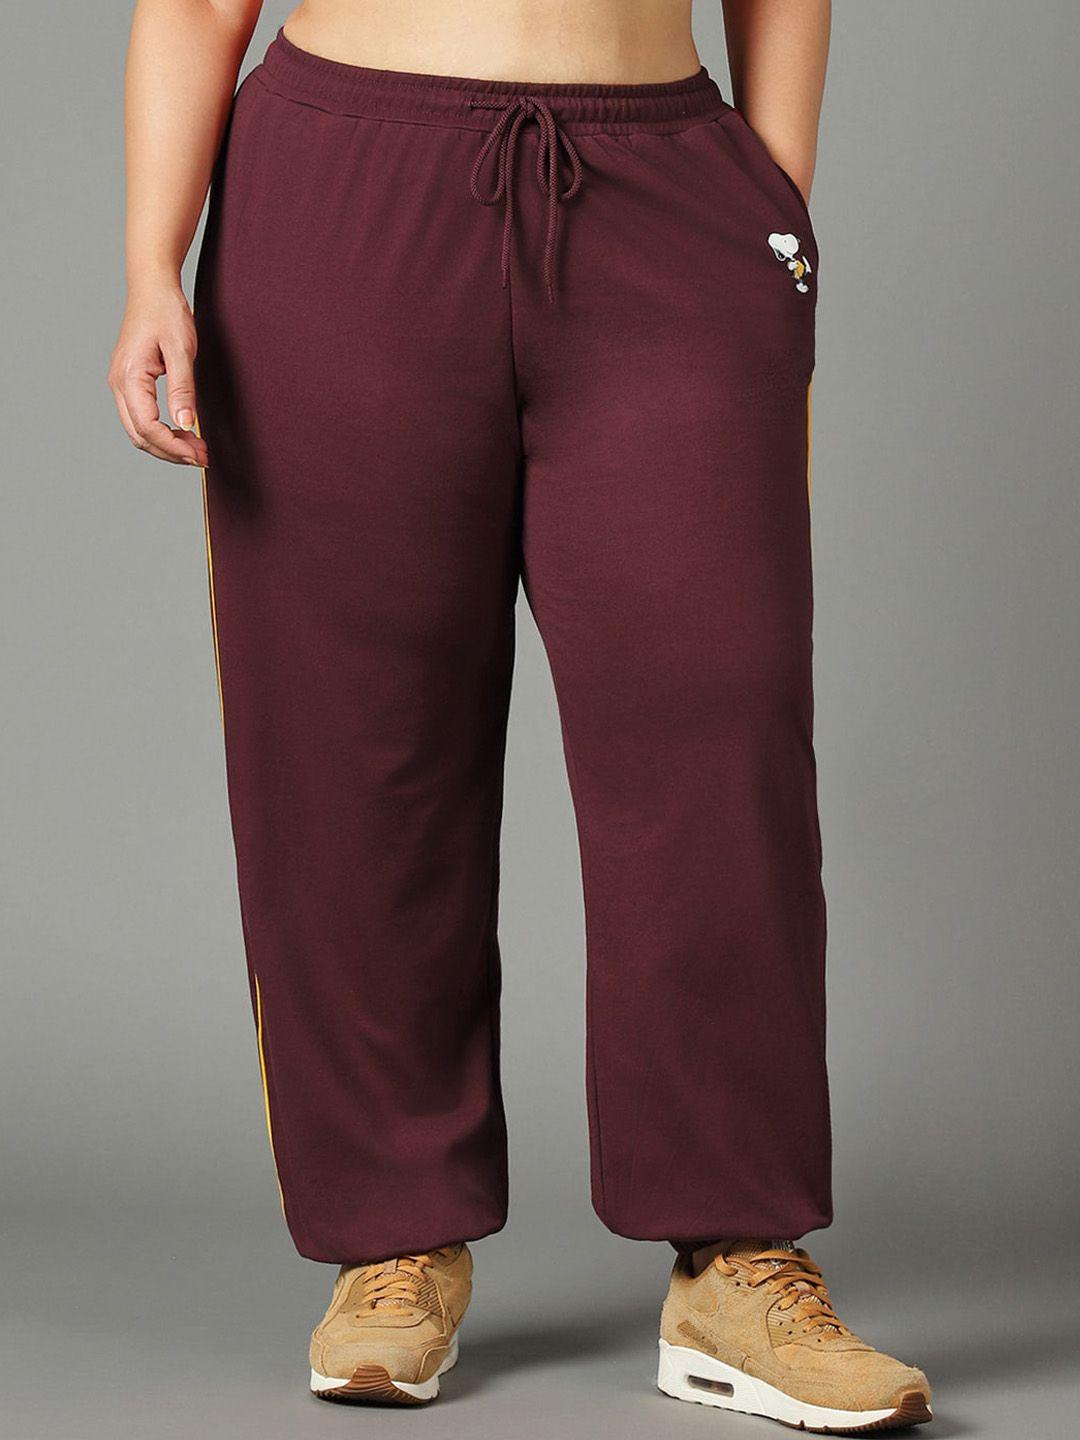 bewakoof-plus-size-women-peanuts-printed-cotton-relaxed-fit-joggers